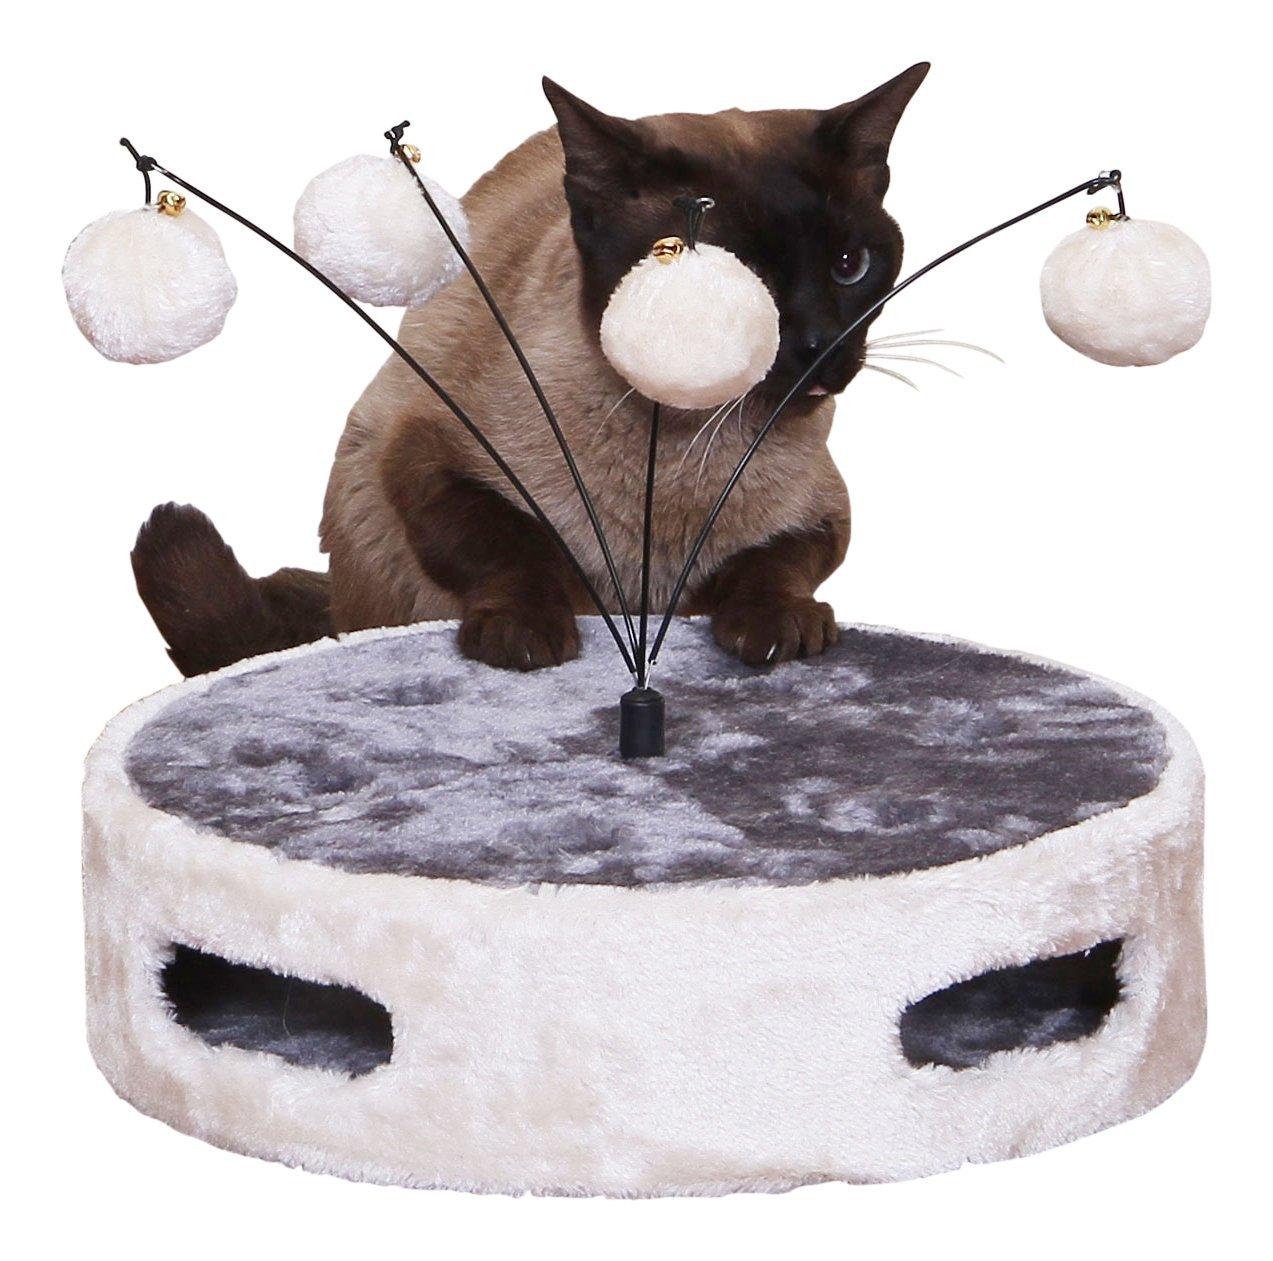 PetPals Calzone (Ivory) - Ivory Round Fun Cat Toy with Teaser Balls